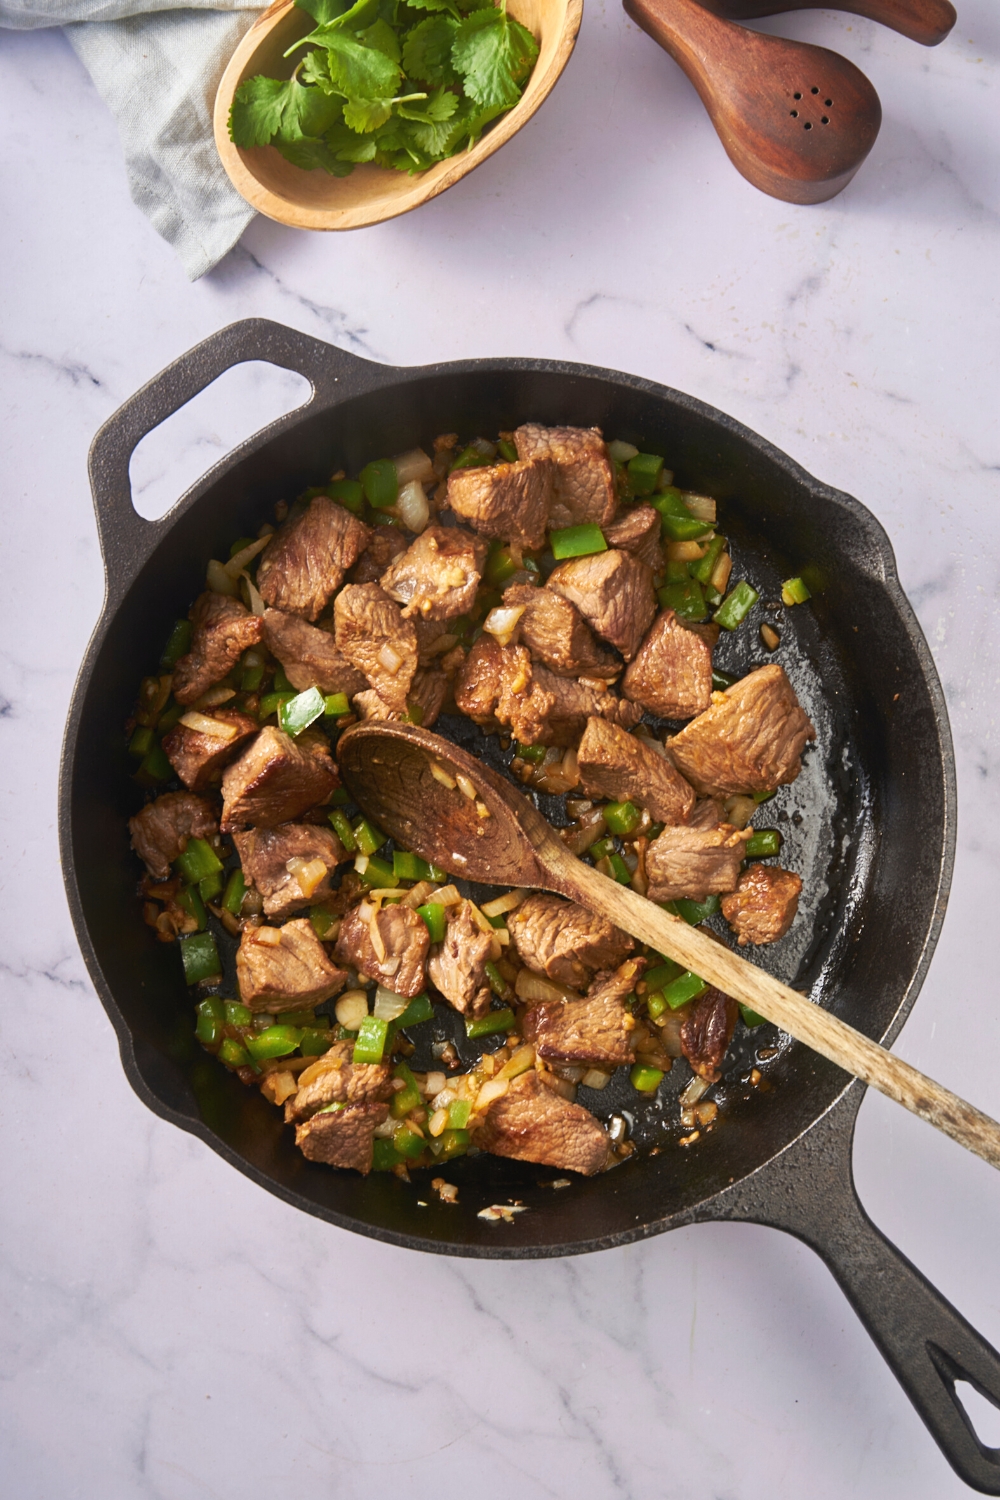 Stew meat, diced onion, and green pepper cooking in a pan.